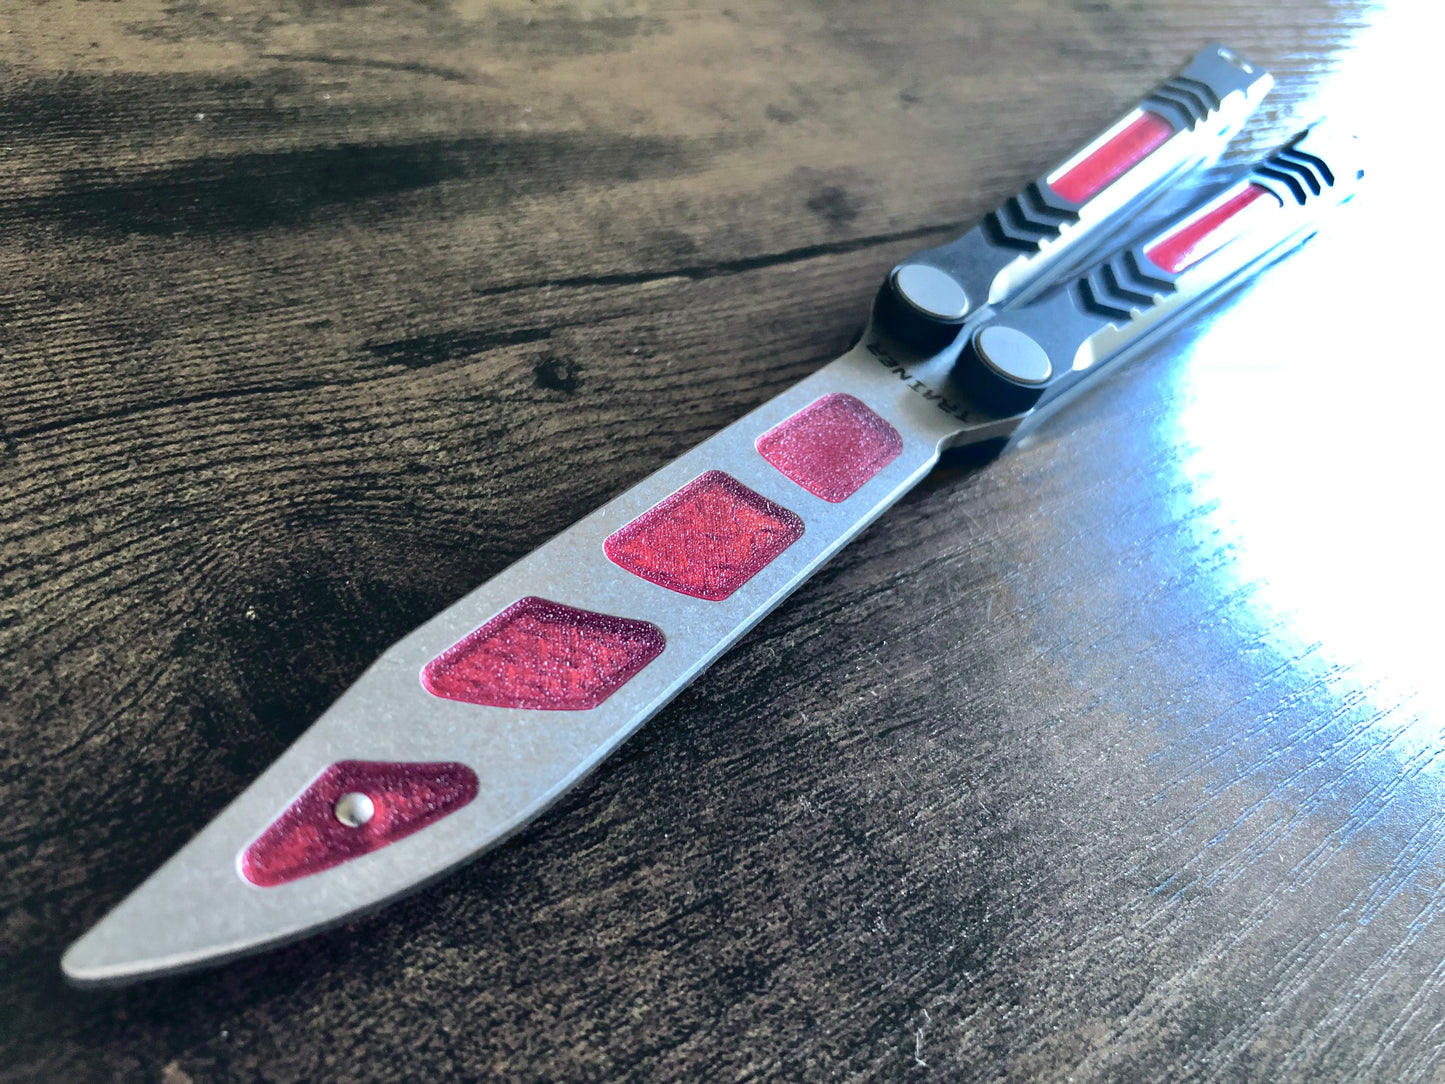 Modify the balance of your Revo Nexus balisong trainer with this custom-made Zippy balance mod. These inserts add blade weight for a more neutral balance profile. The inserts are made from a shatter-proof polyurethane and won't fall out on drops.